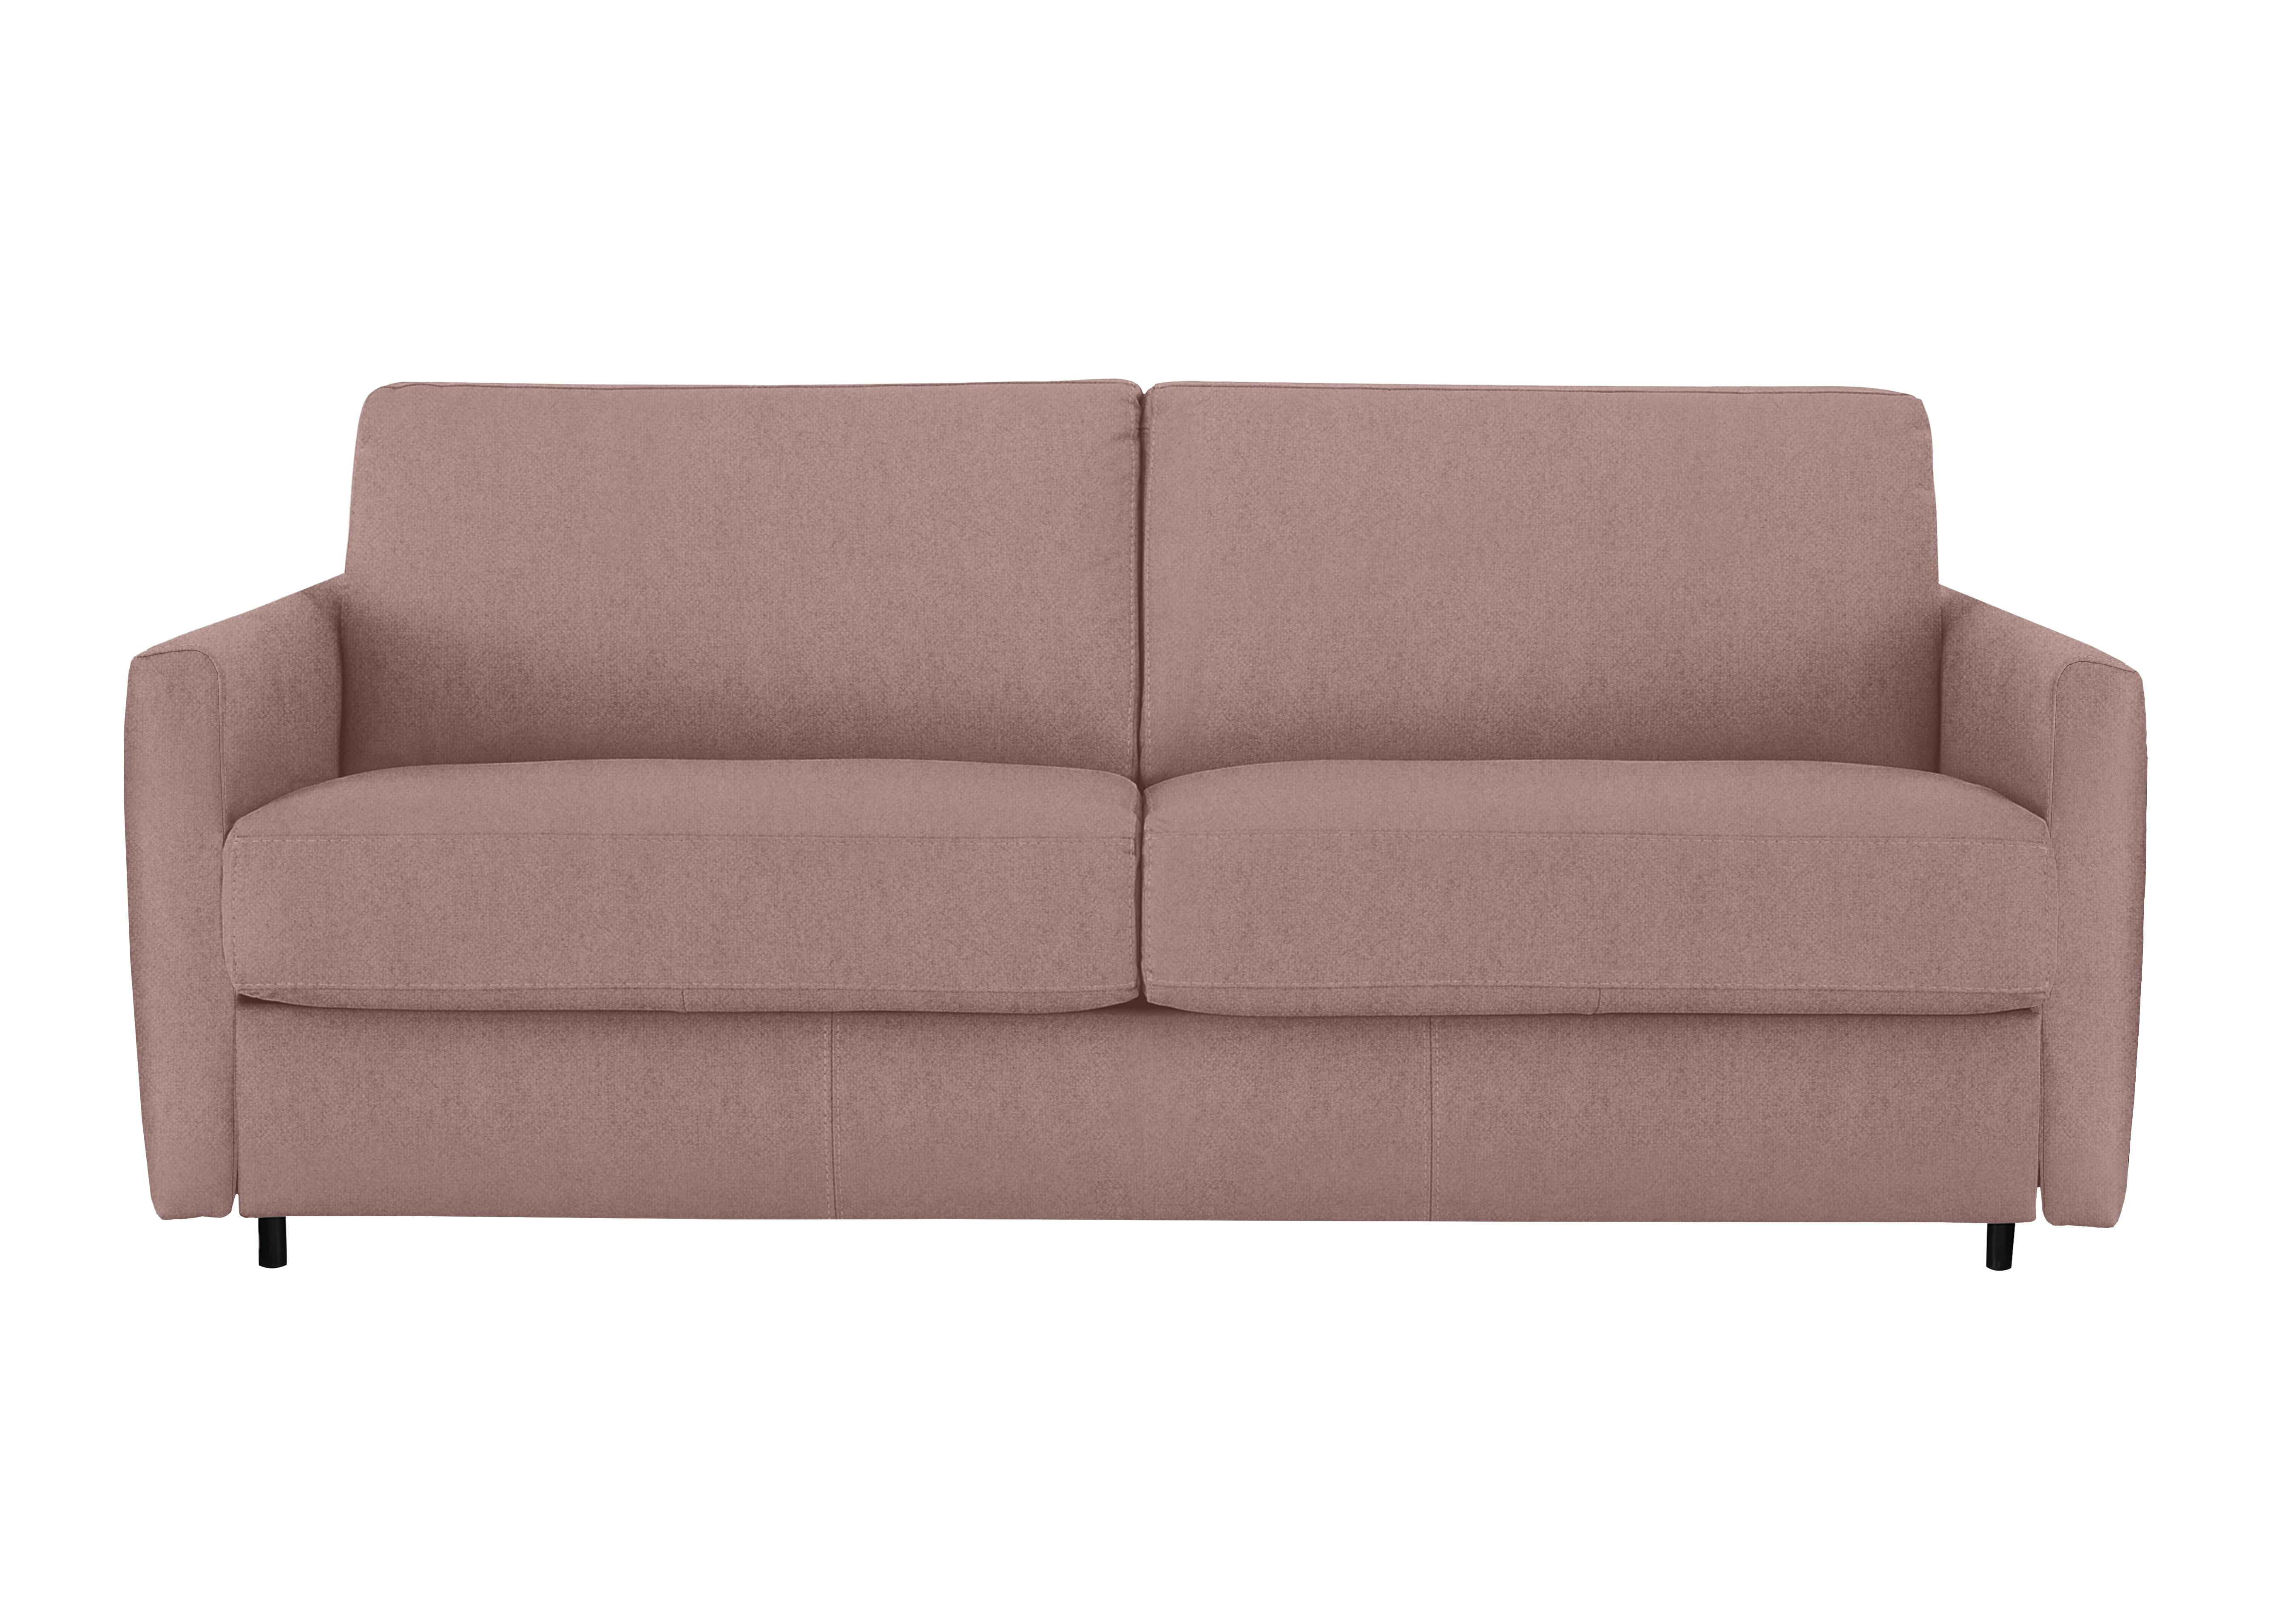 Alcova 3 Seater Fabric Sofa Bed with Slim Arms in Fuente Coral on Furniture Village